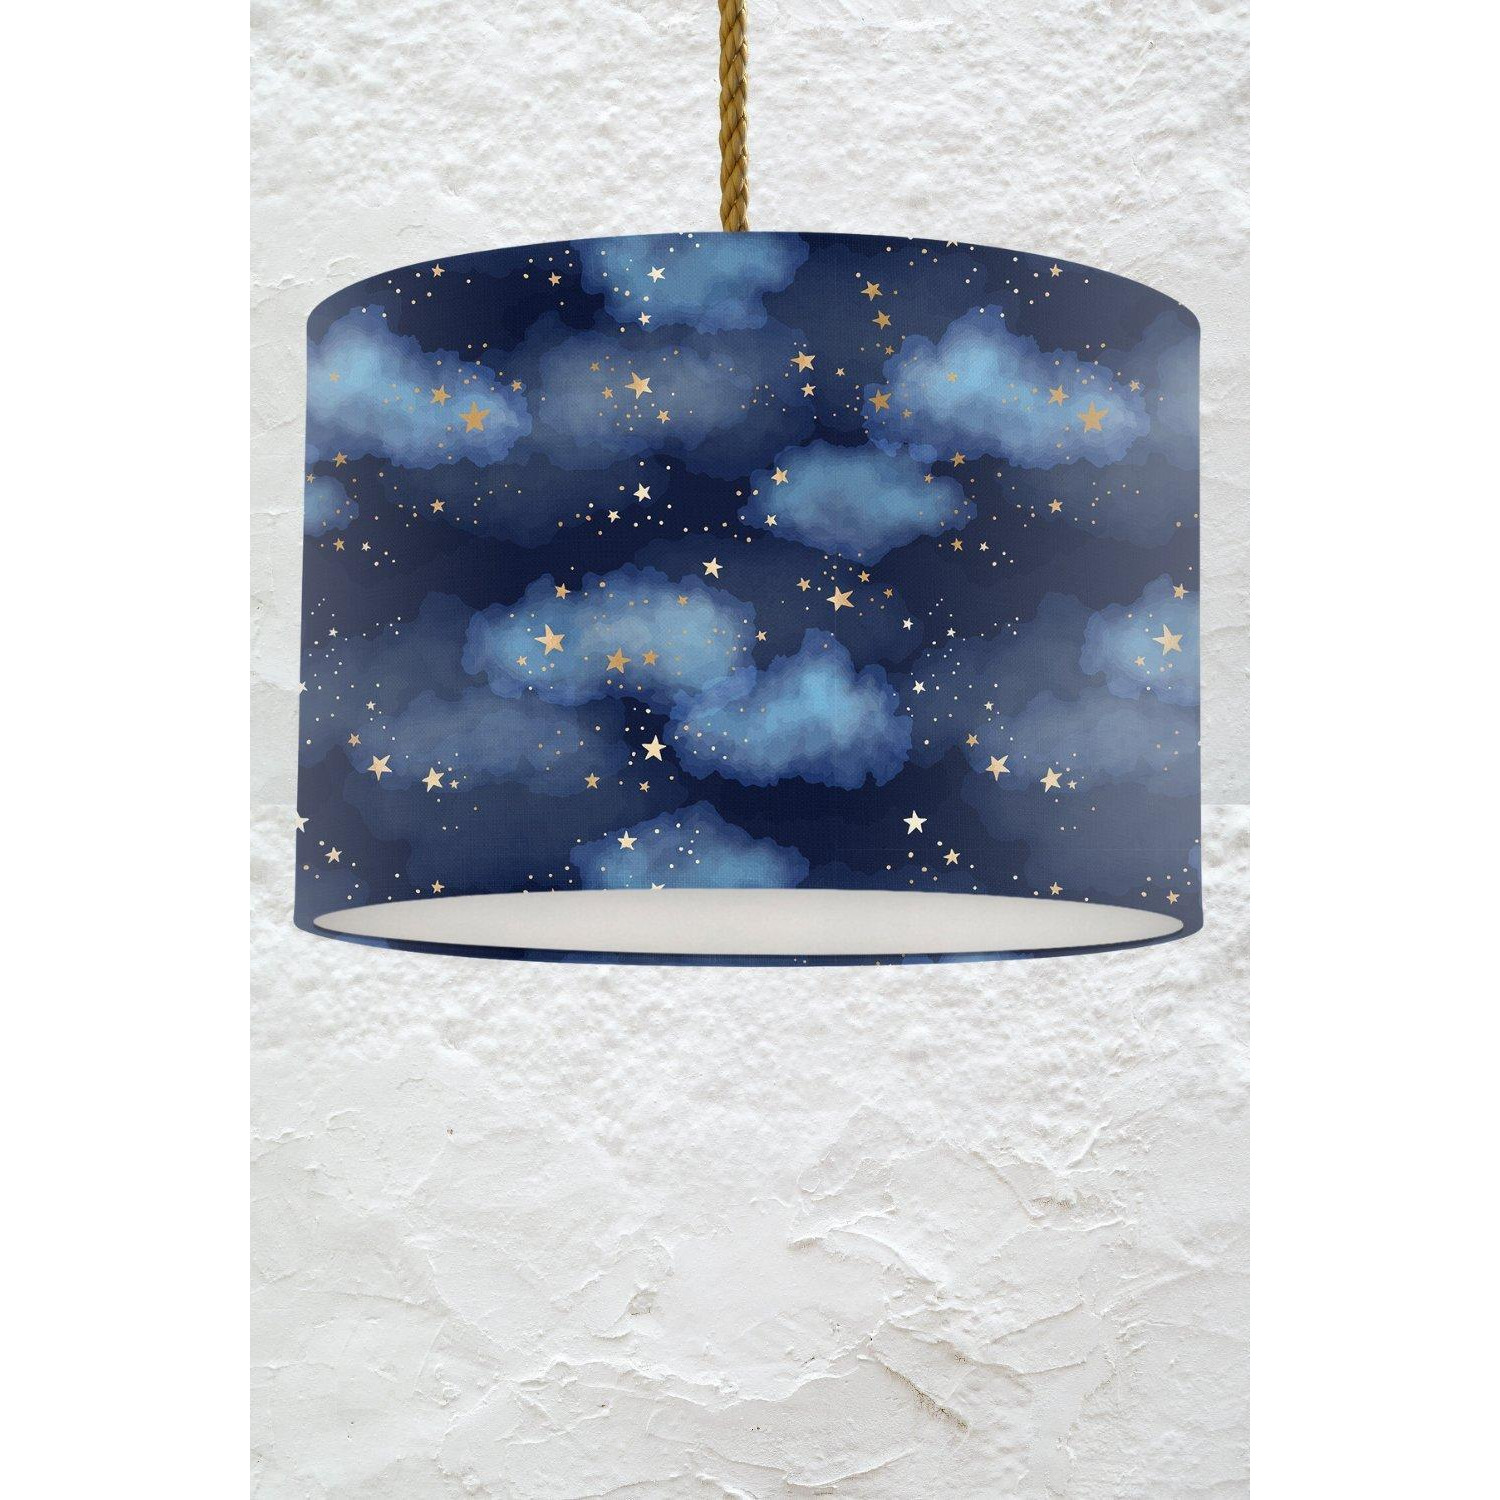 Night Sky and Gold Stars Lampshade - image 1